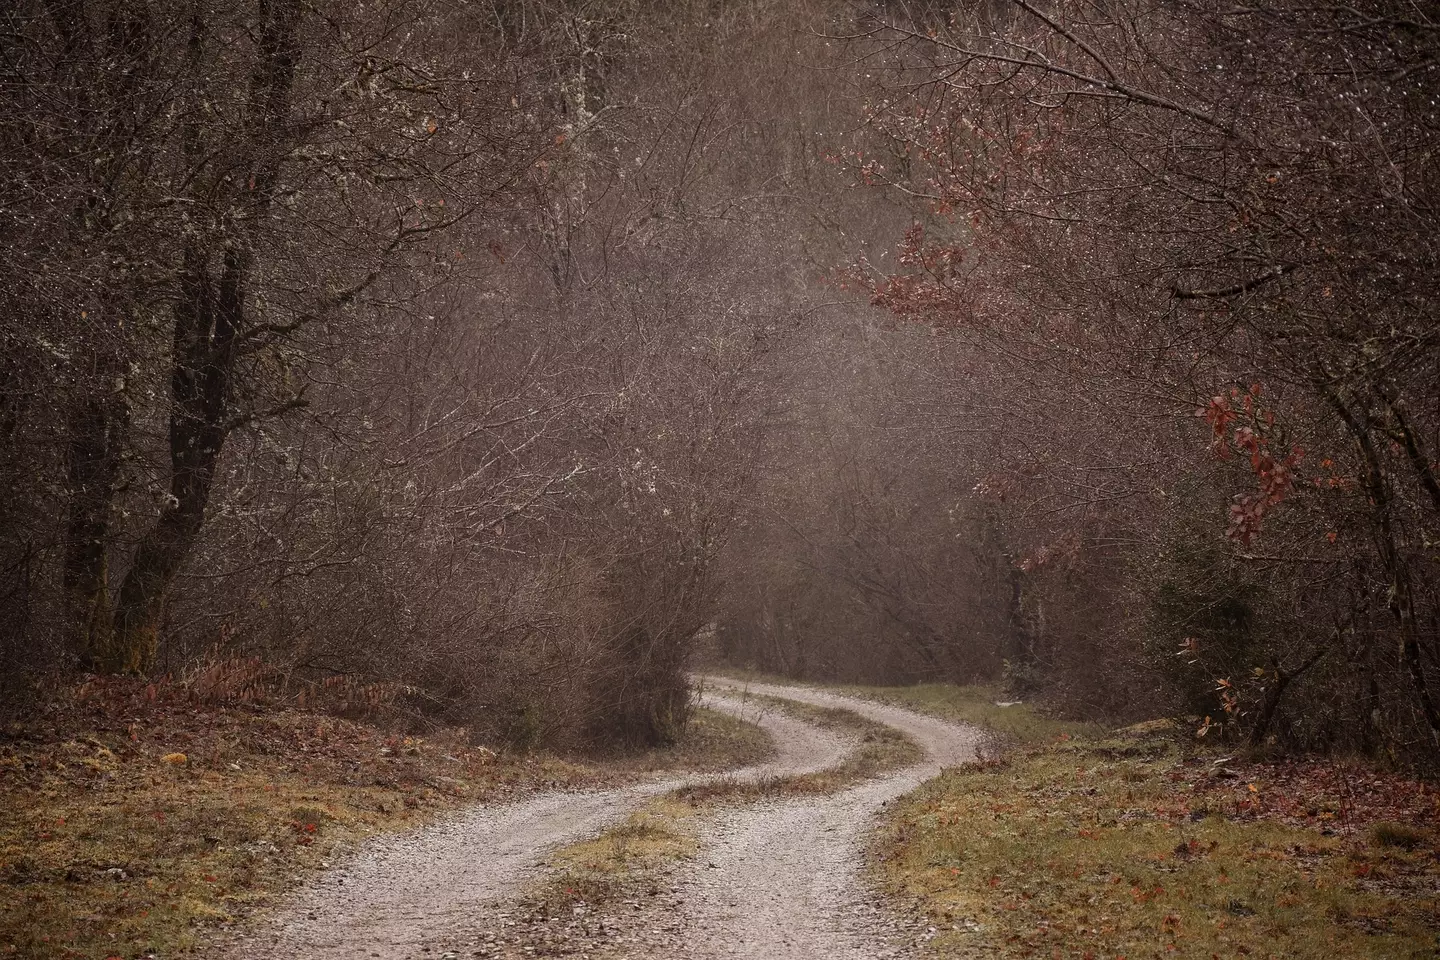 The United States is full of tales of haunted highways and byways.